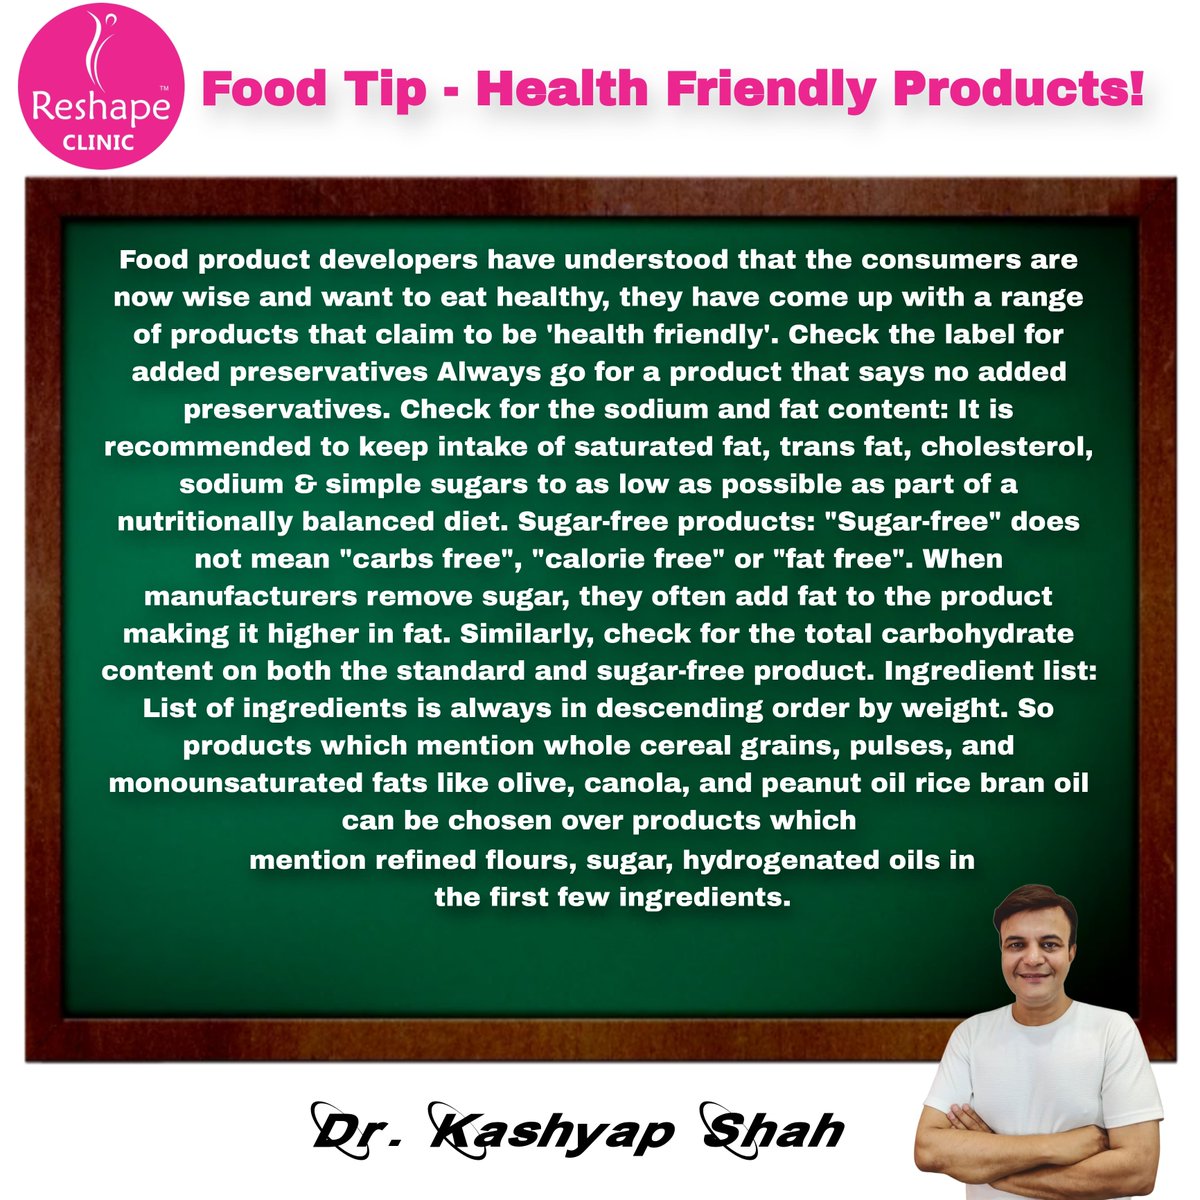 Reading food labels should be a part of your day to day life while shopping food products... Learn how to read and understand food labels!
.
.
.
.
.
#foodlabels #ReShapeClinic #drkashyapshah #foodtips #reading #ingredientsmatter